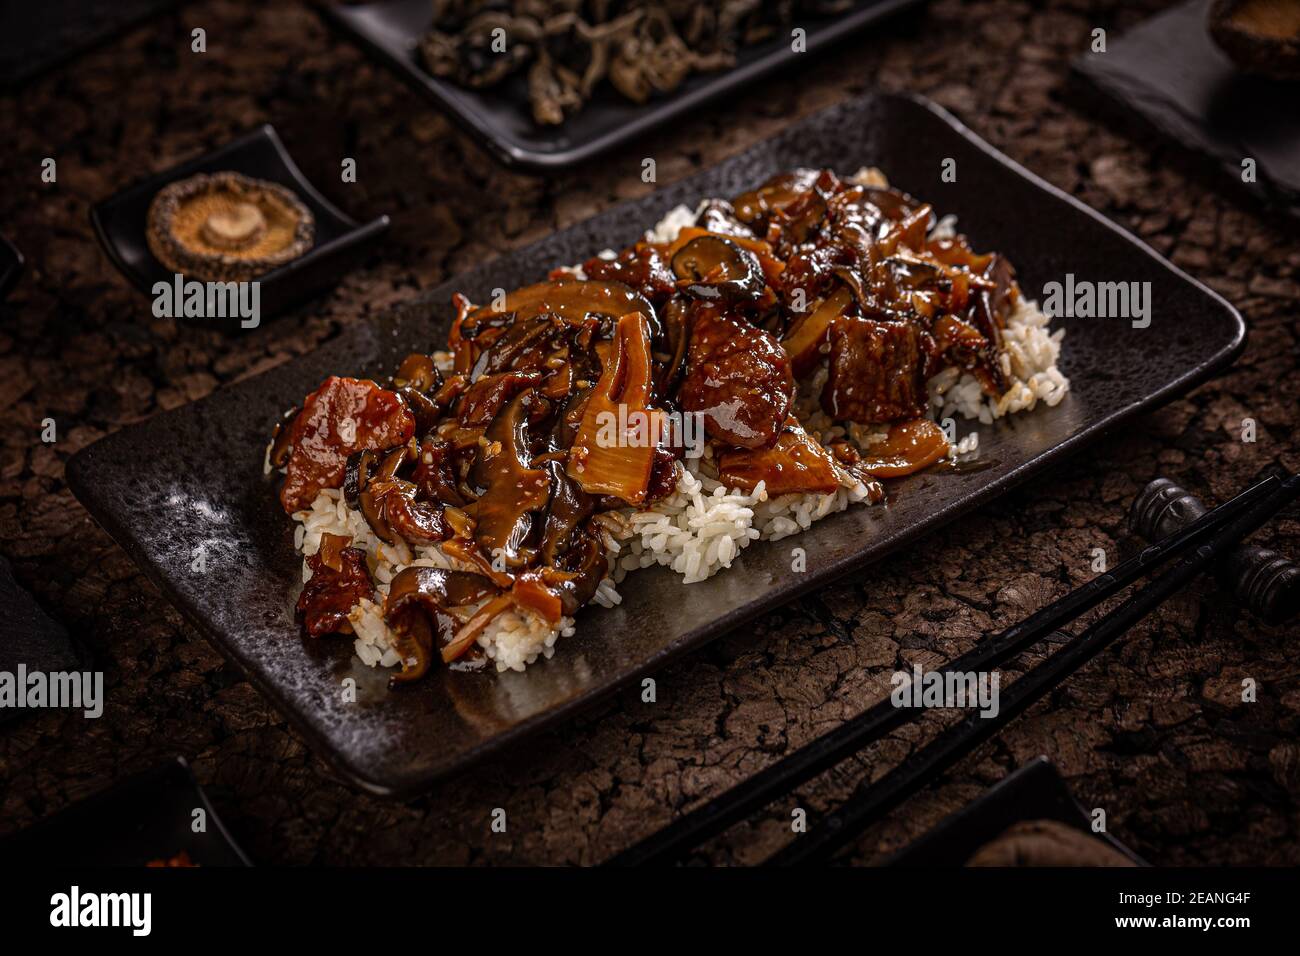 Beef with mix vegetable Stock Photo